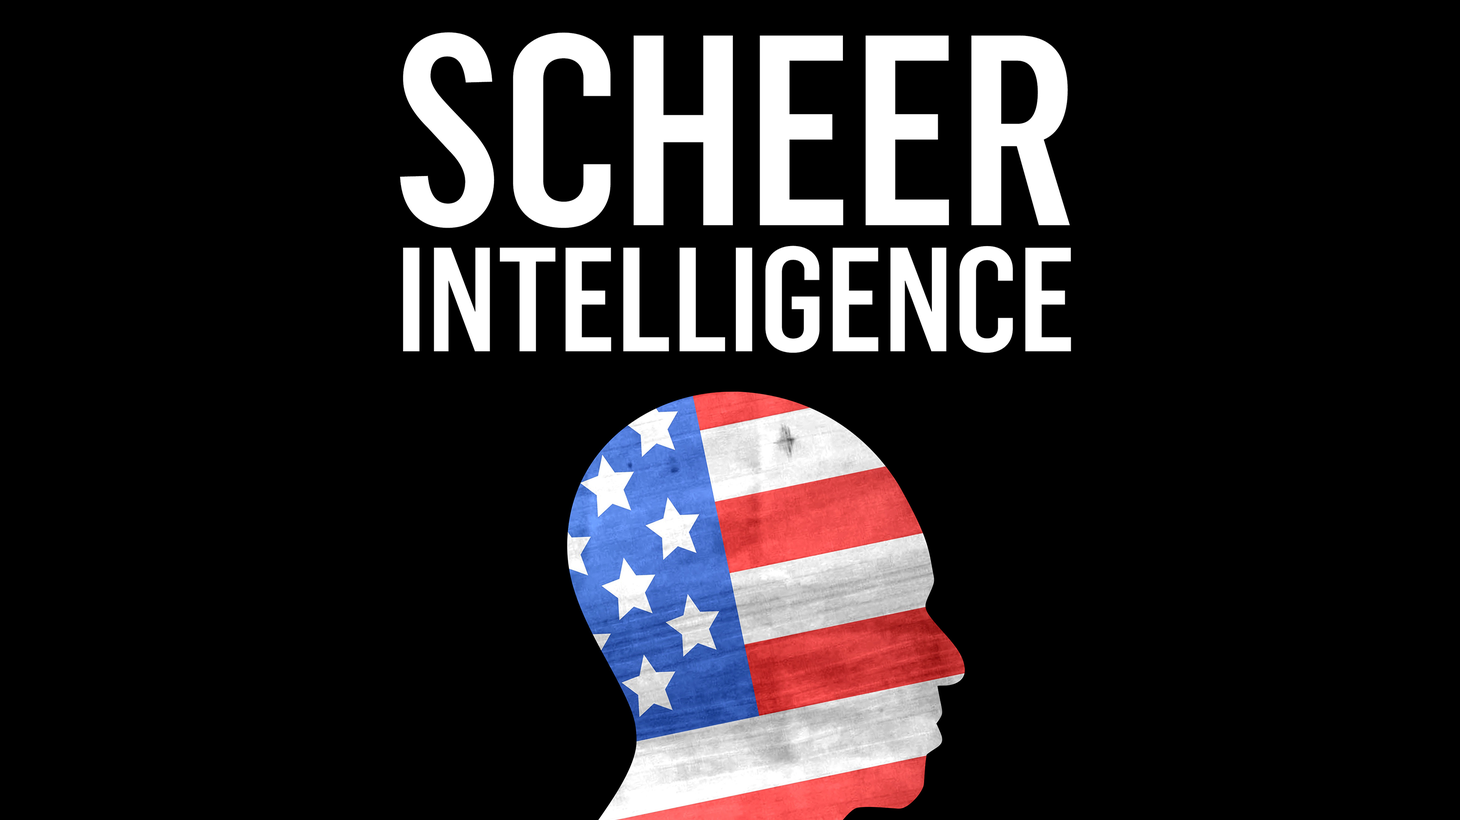 Robert Scheer sits down with author, lawyer and five-time presidential candidate, Ralph Nader, to discuss the current political climate and assess Nader's legacy.